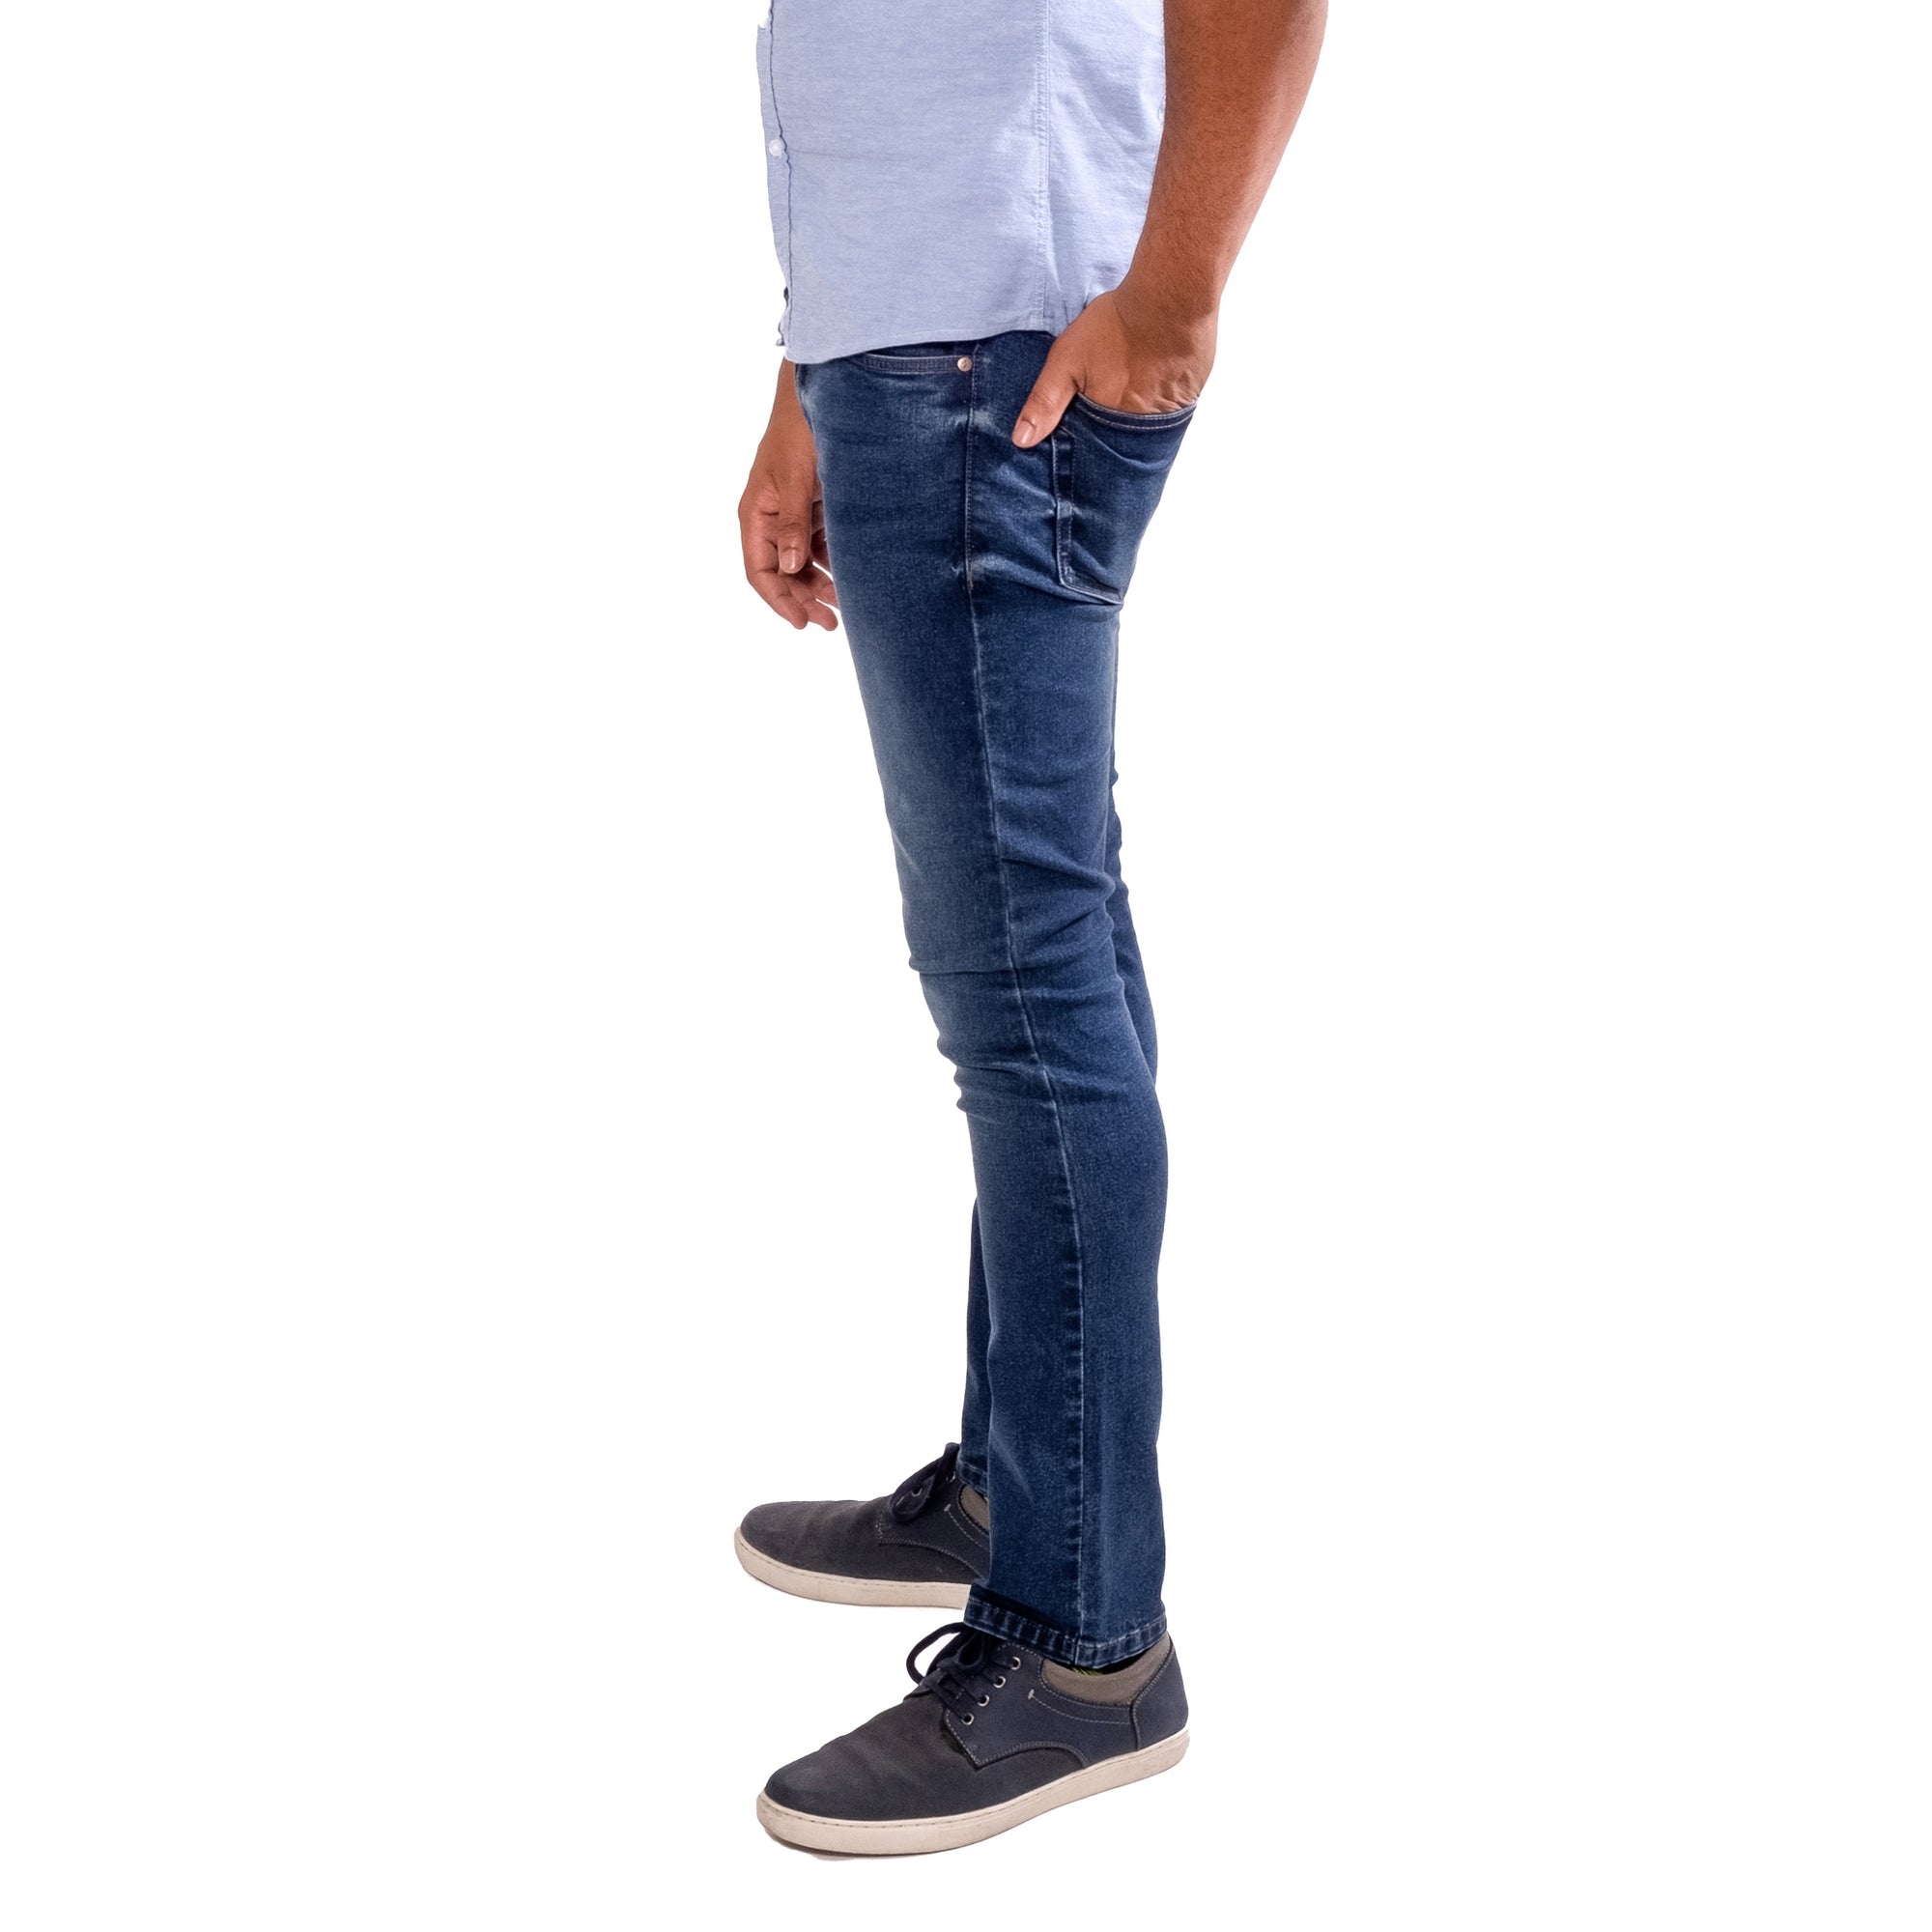 Skinny Fit / Admiral - Medium Blue Jeans | The Perfect Jean | Stretchjeans